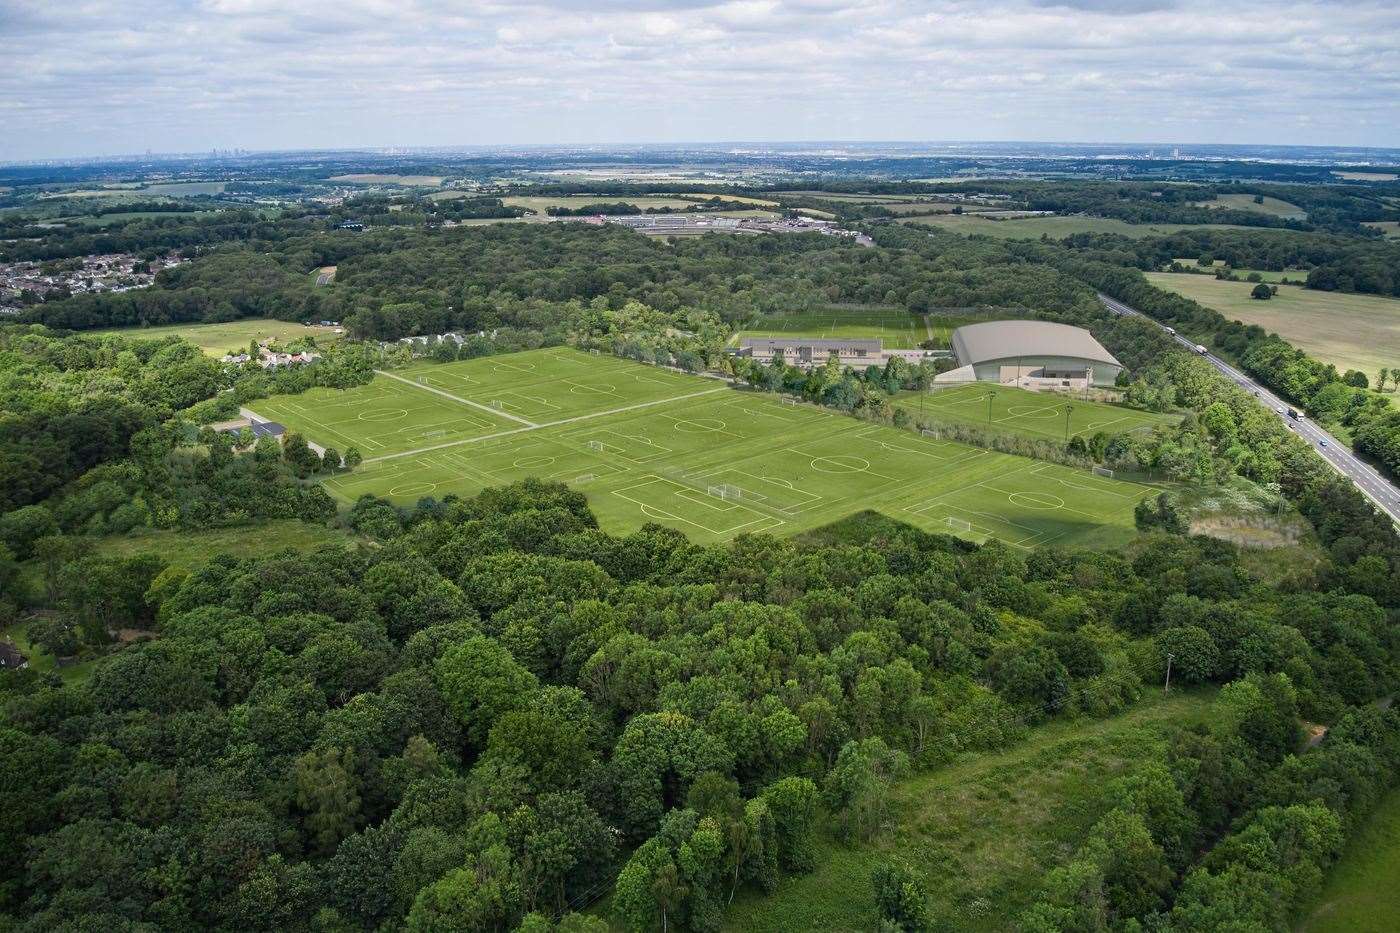 An aerial view of where the Millwall FC training ground will be built in West Kingsdown, Sevenoaks. Photo: Millwall FC